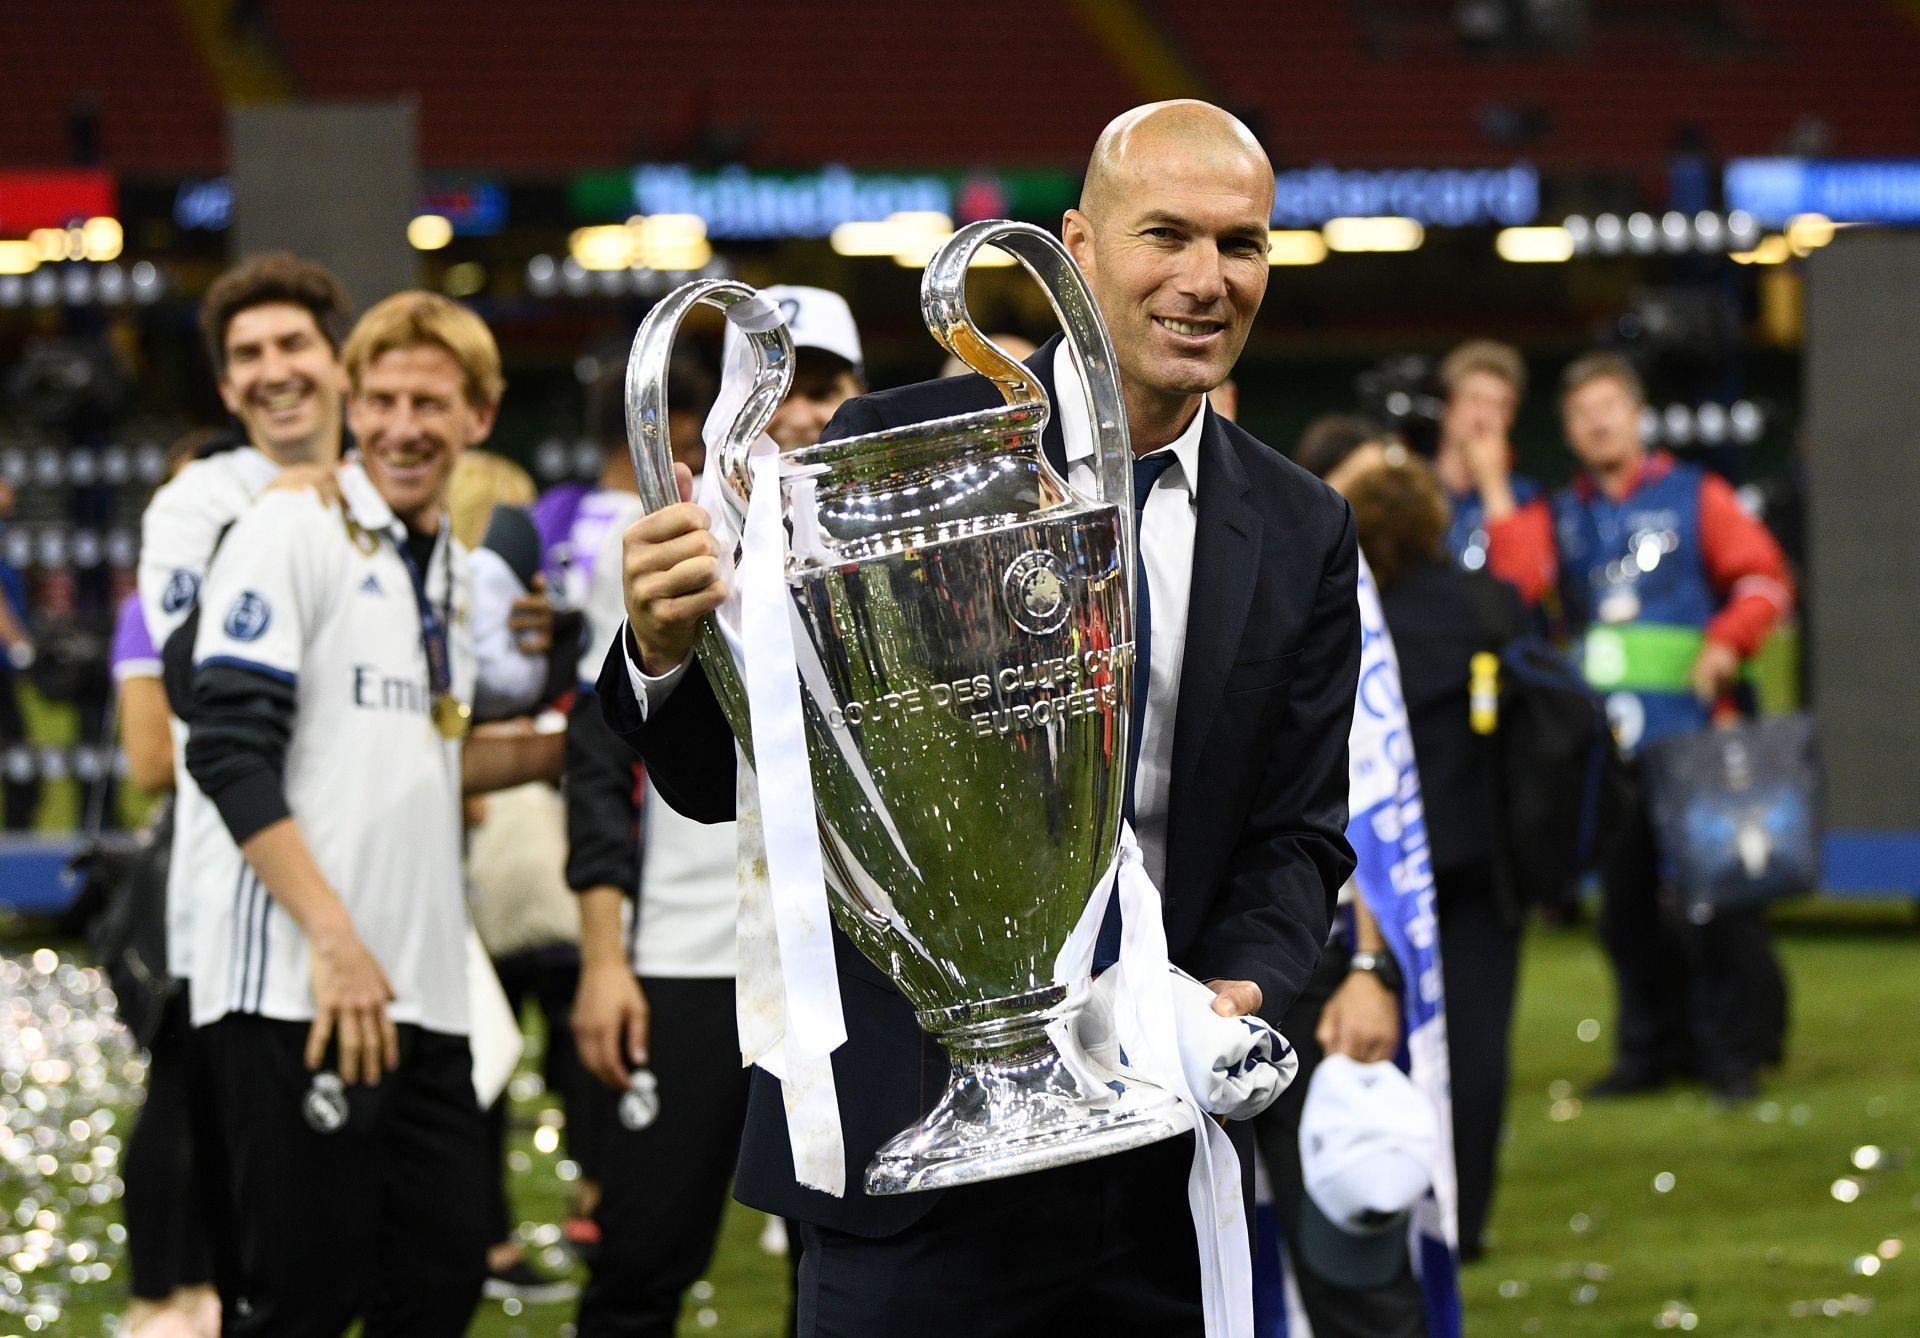 Zinedine Zidane poses with the Champions League trophy.